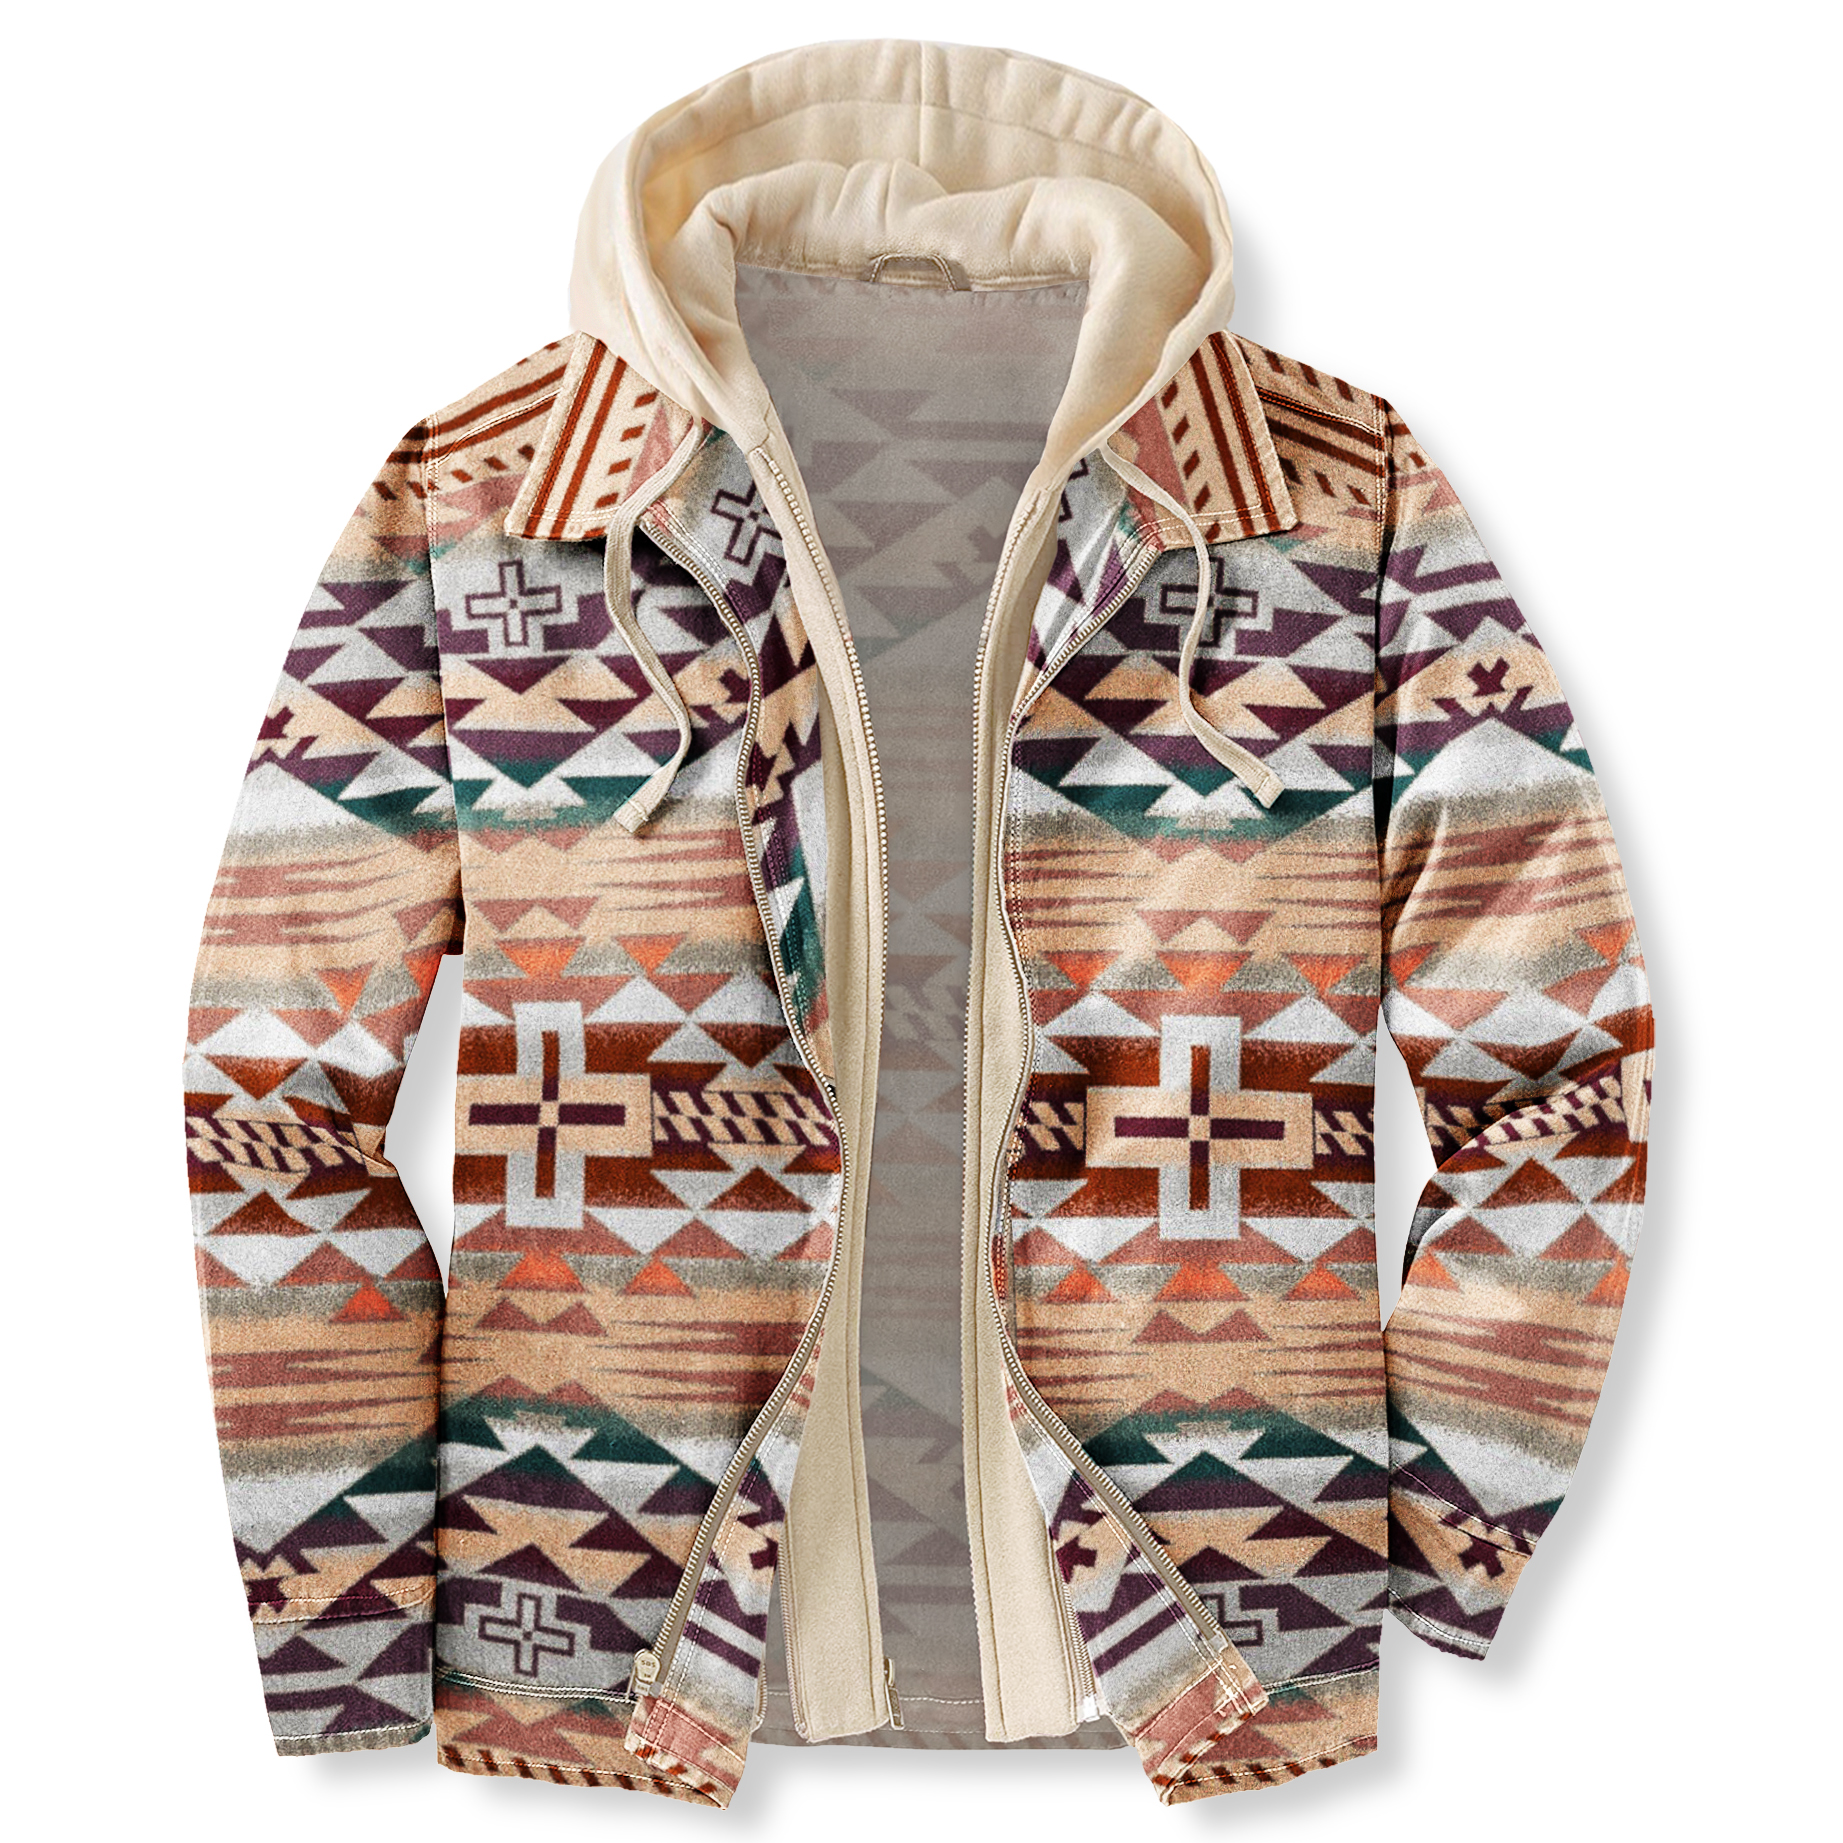 Men's Autumn & Winter Chic Outdoor Casual Vintage Ethnic Print Hooded Jacket